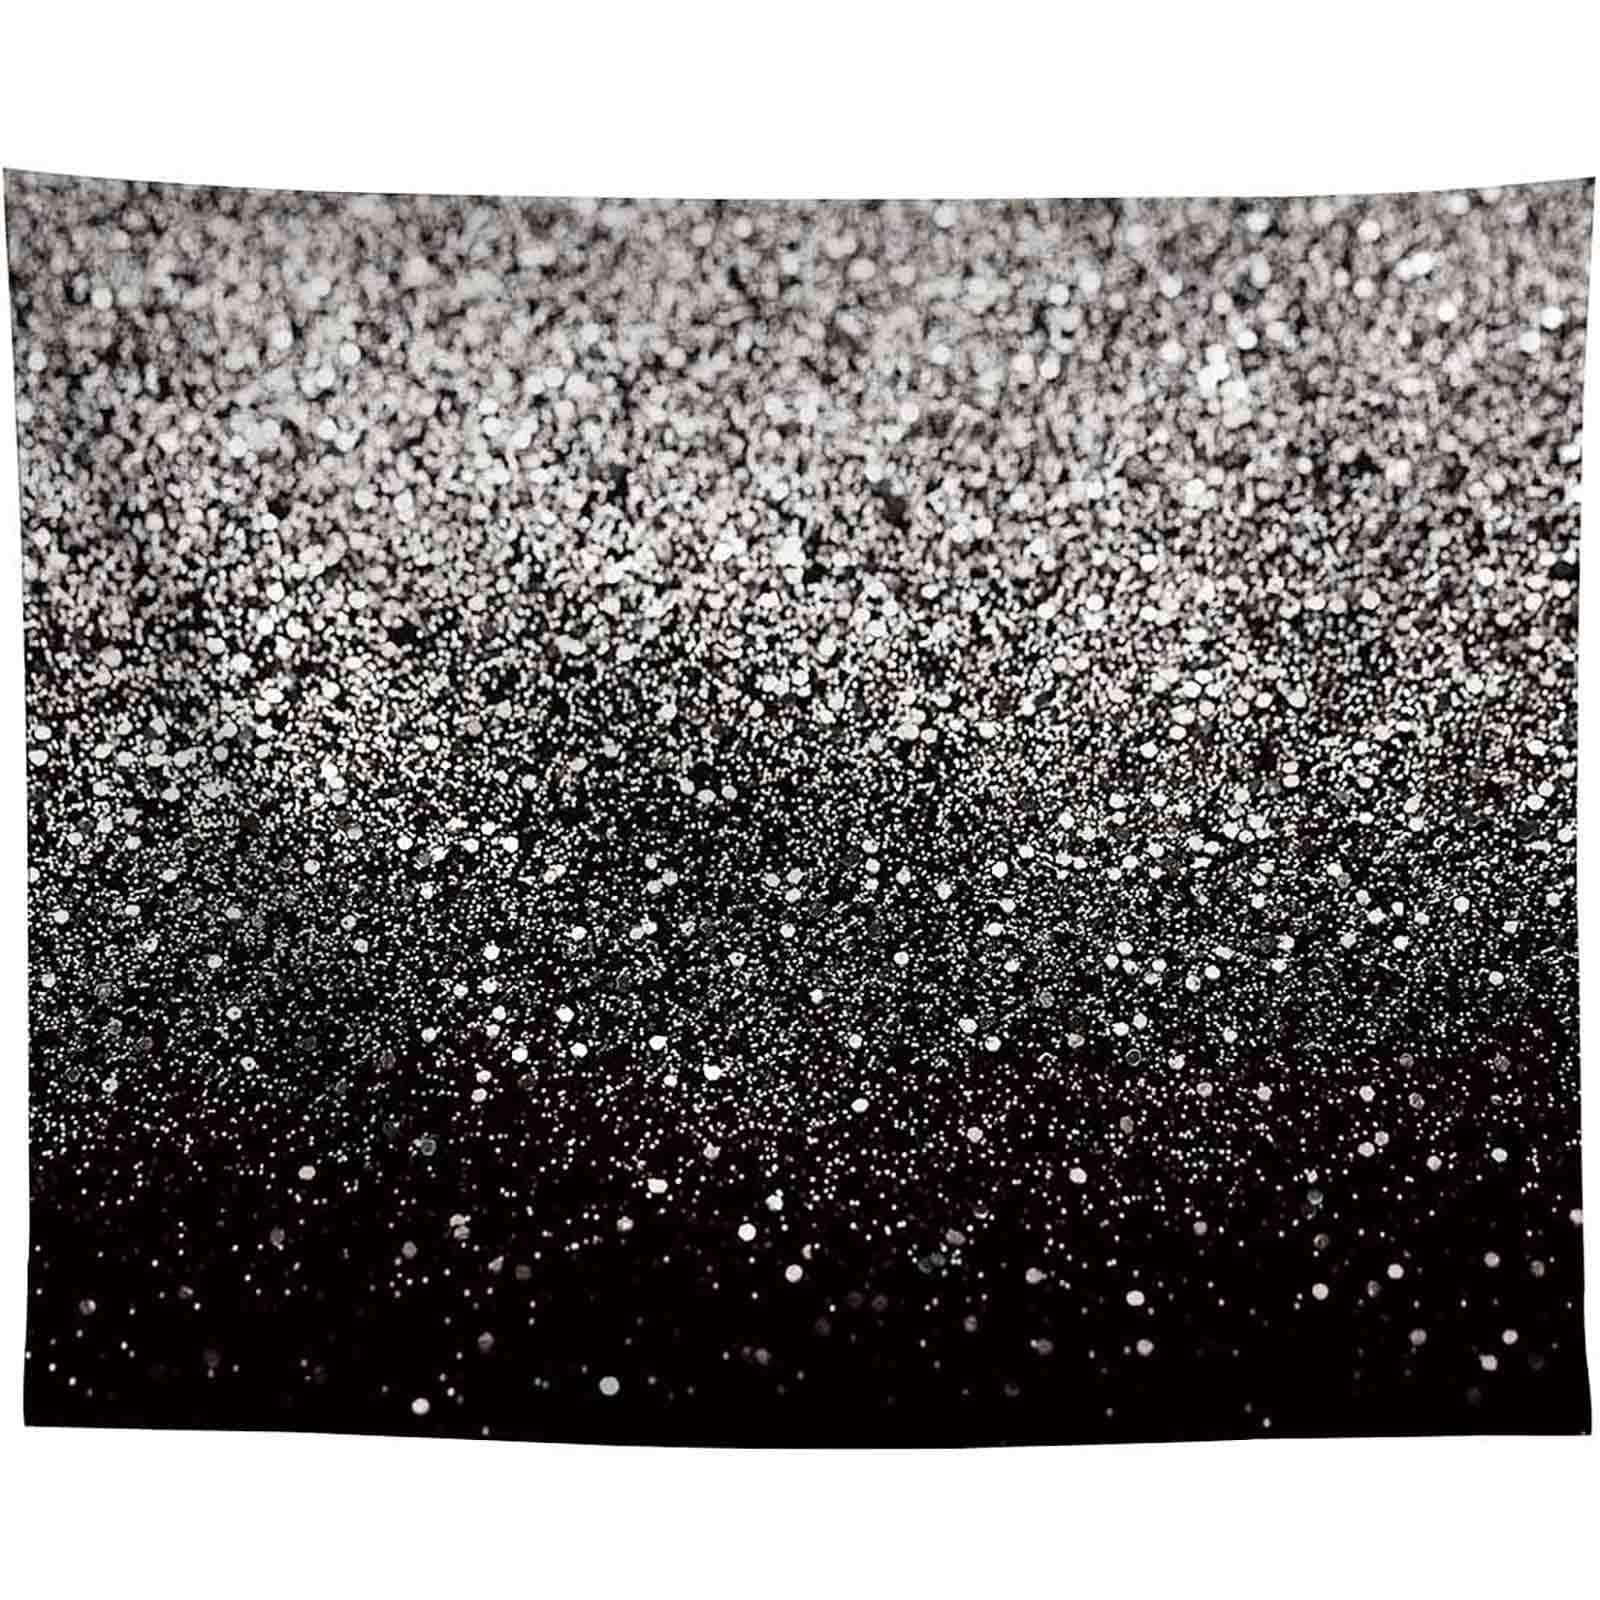 Shine bright like a diamond with our sparkly silver glitter background.